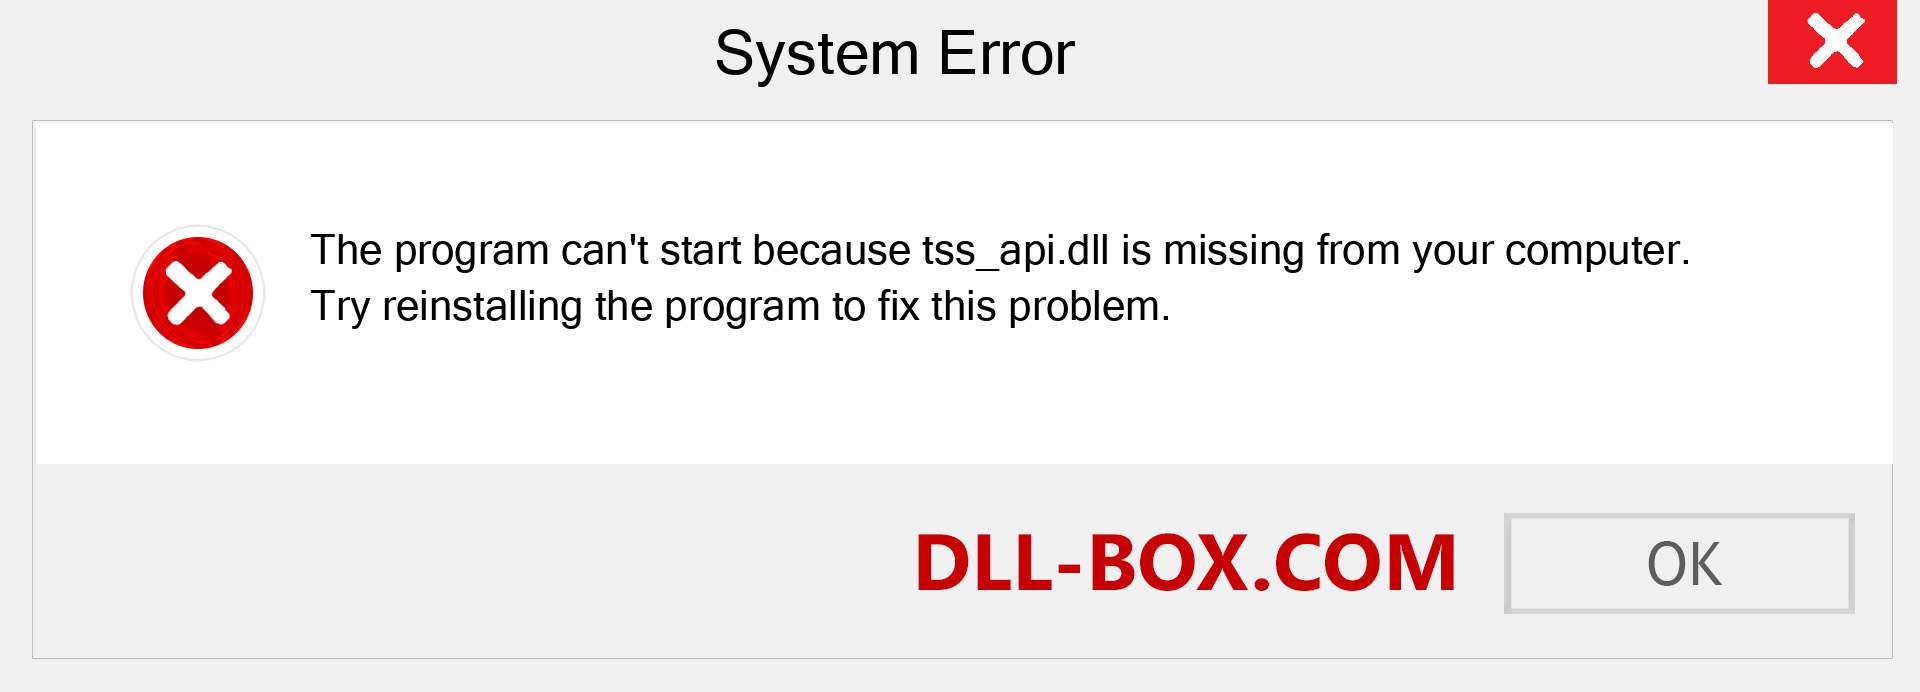  tss_api.dll file is missing?. Download for Windows 7, 8, 10 - Fix  tss_api dll Missing Error on Windows, photos, images